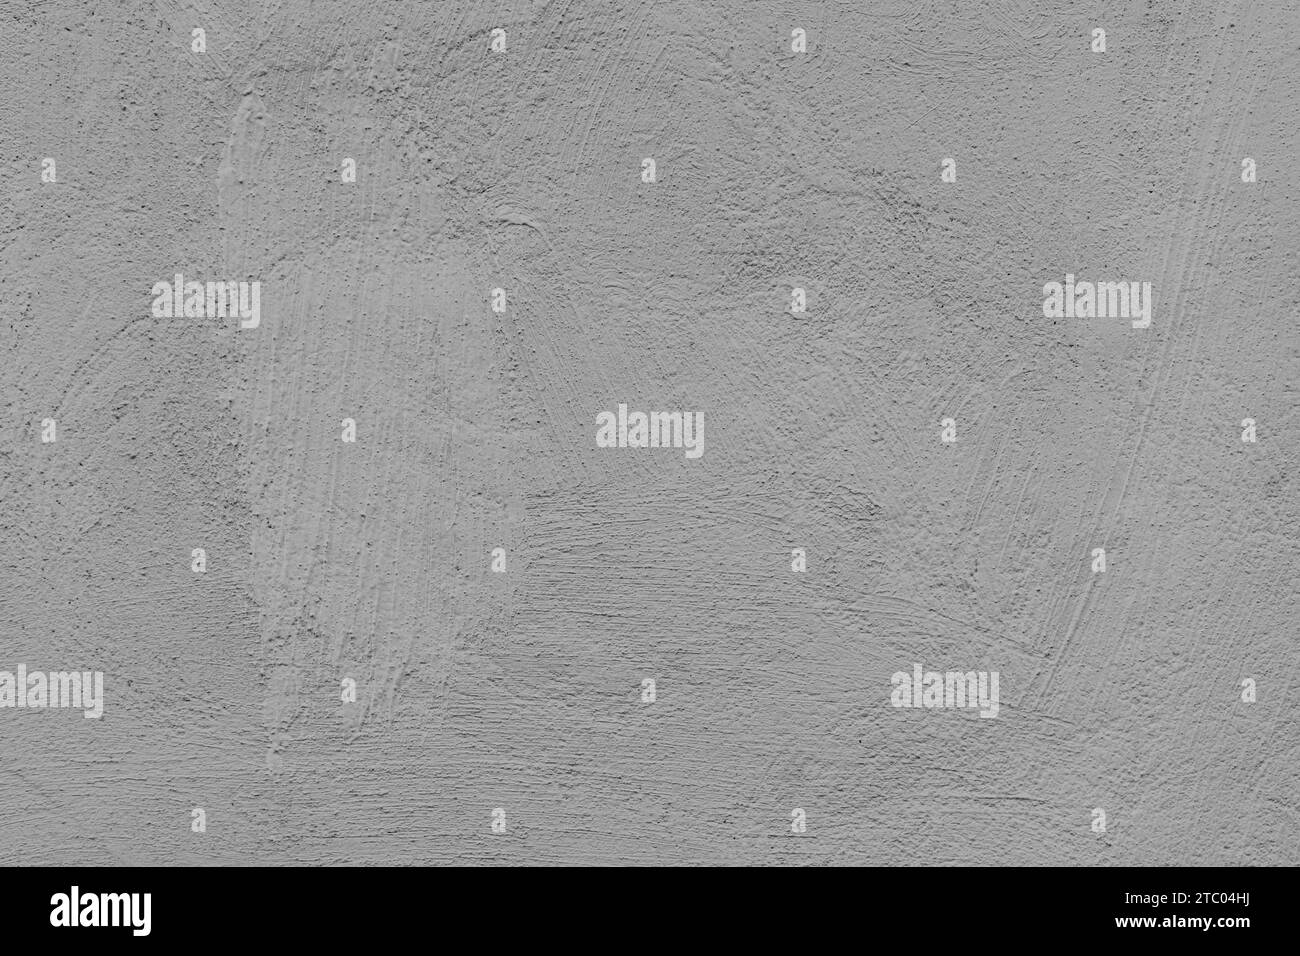 Old stucco plaster surface, brushstroke background, close up grunge texture of gray painted cement, concrete wall texture. Wallpaper, backdrop, archit Stock Photo